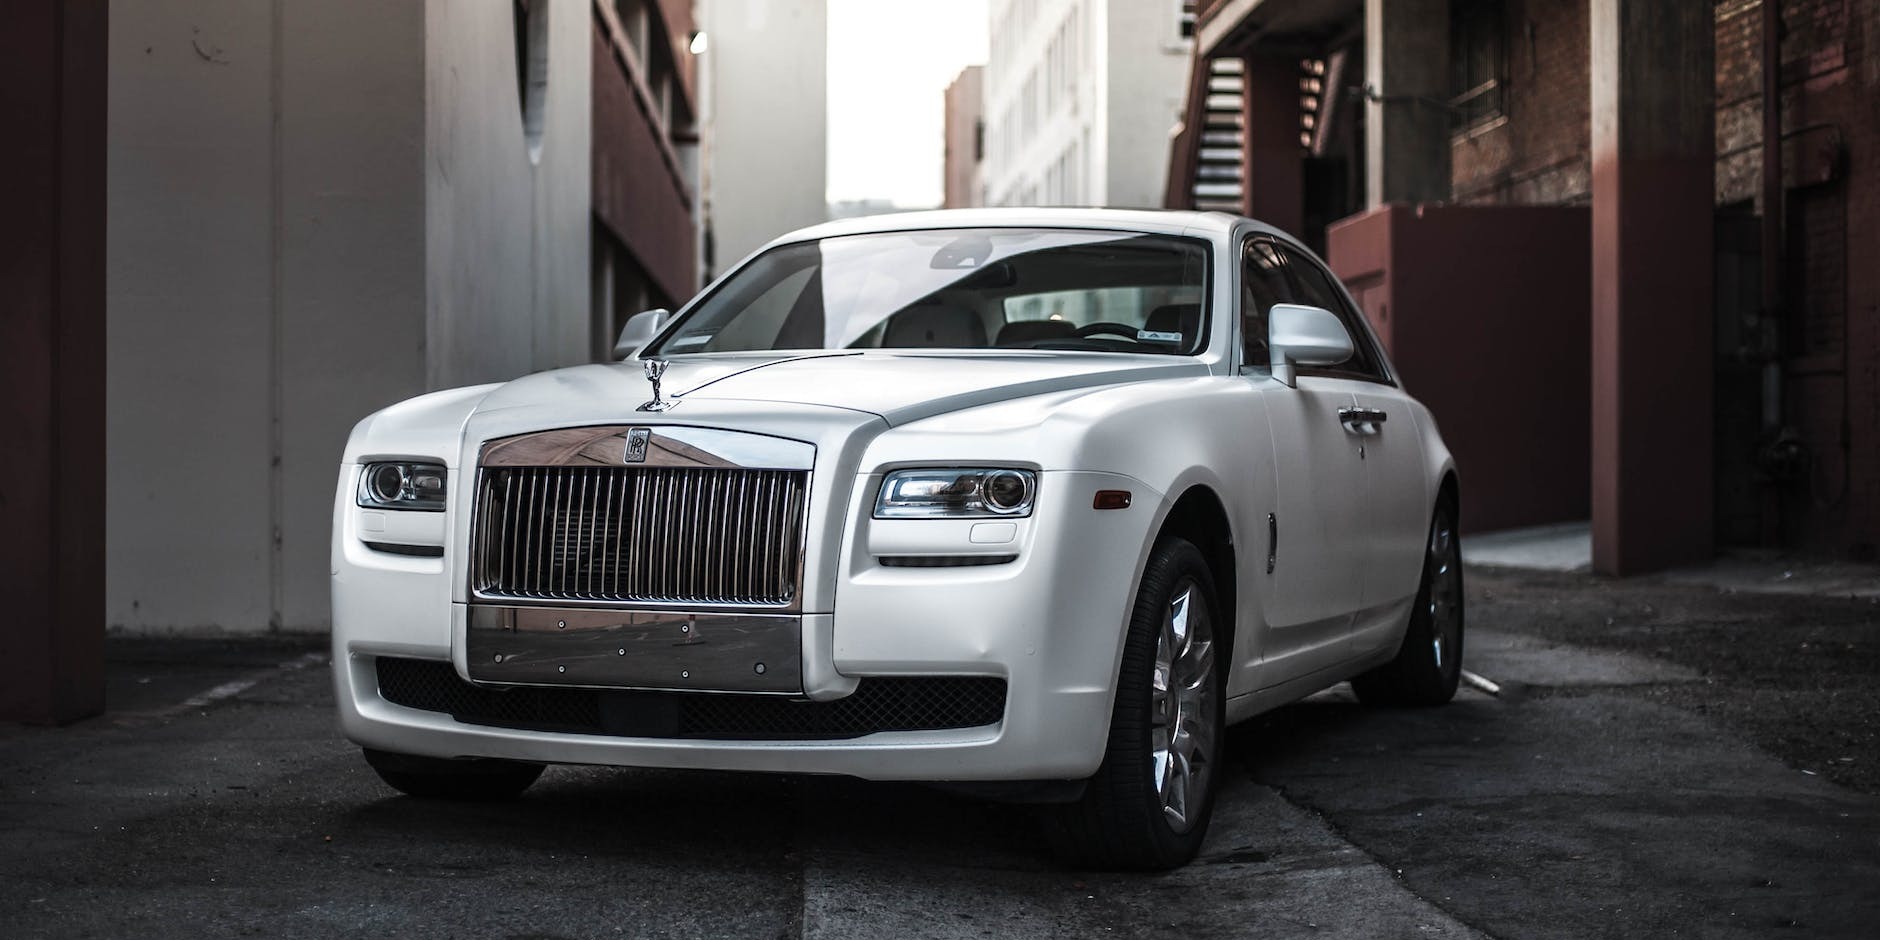 Rolls Royce Phantom Hire in Cardiff and South Wales